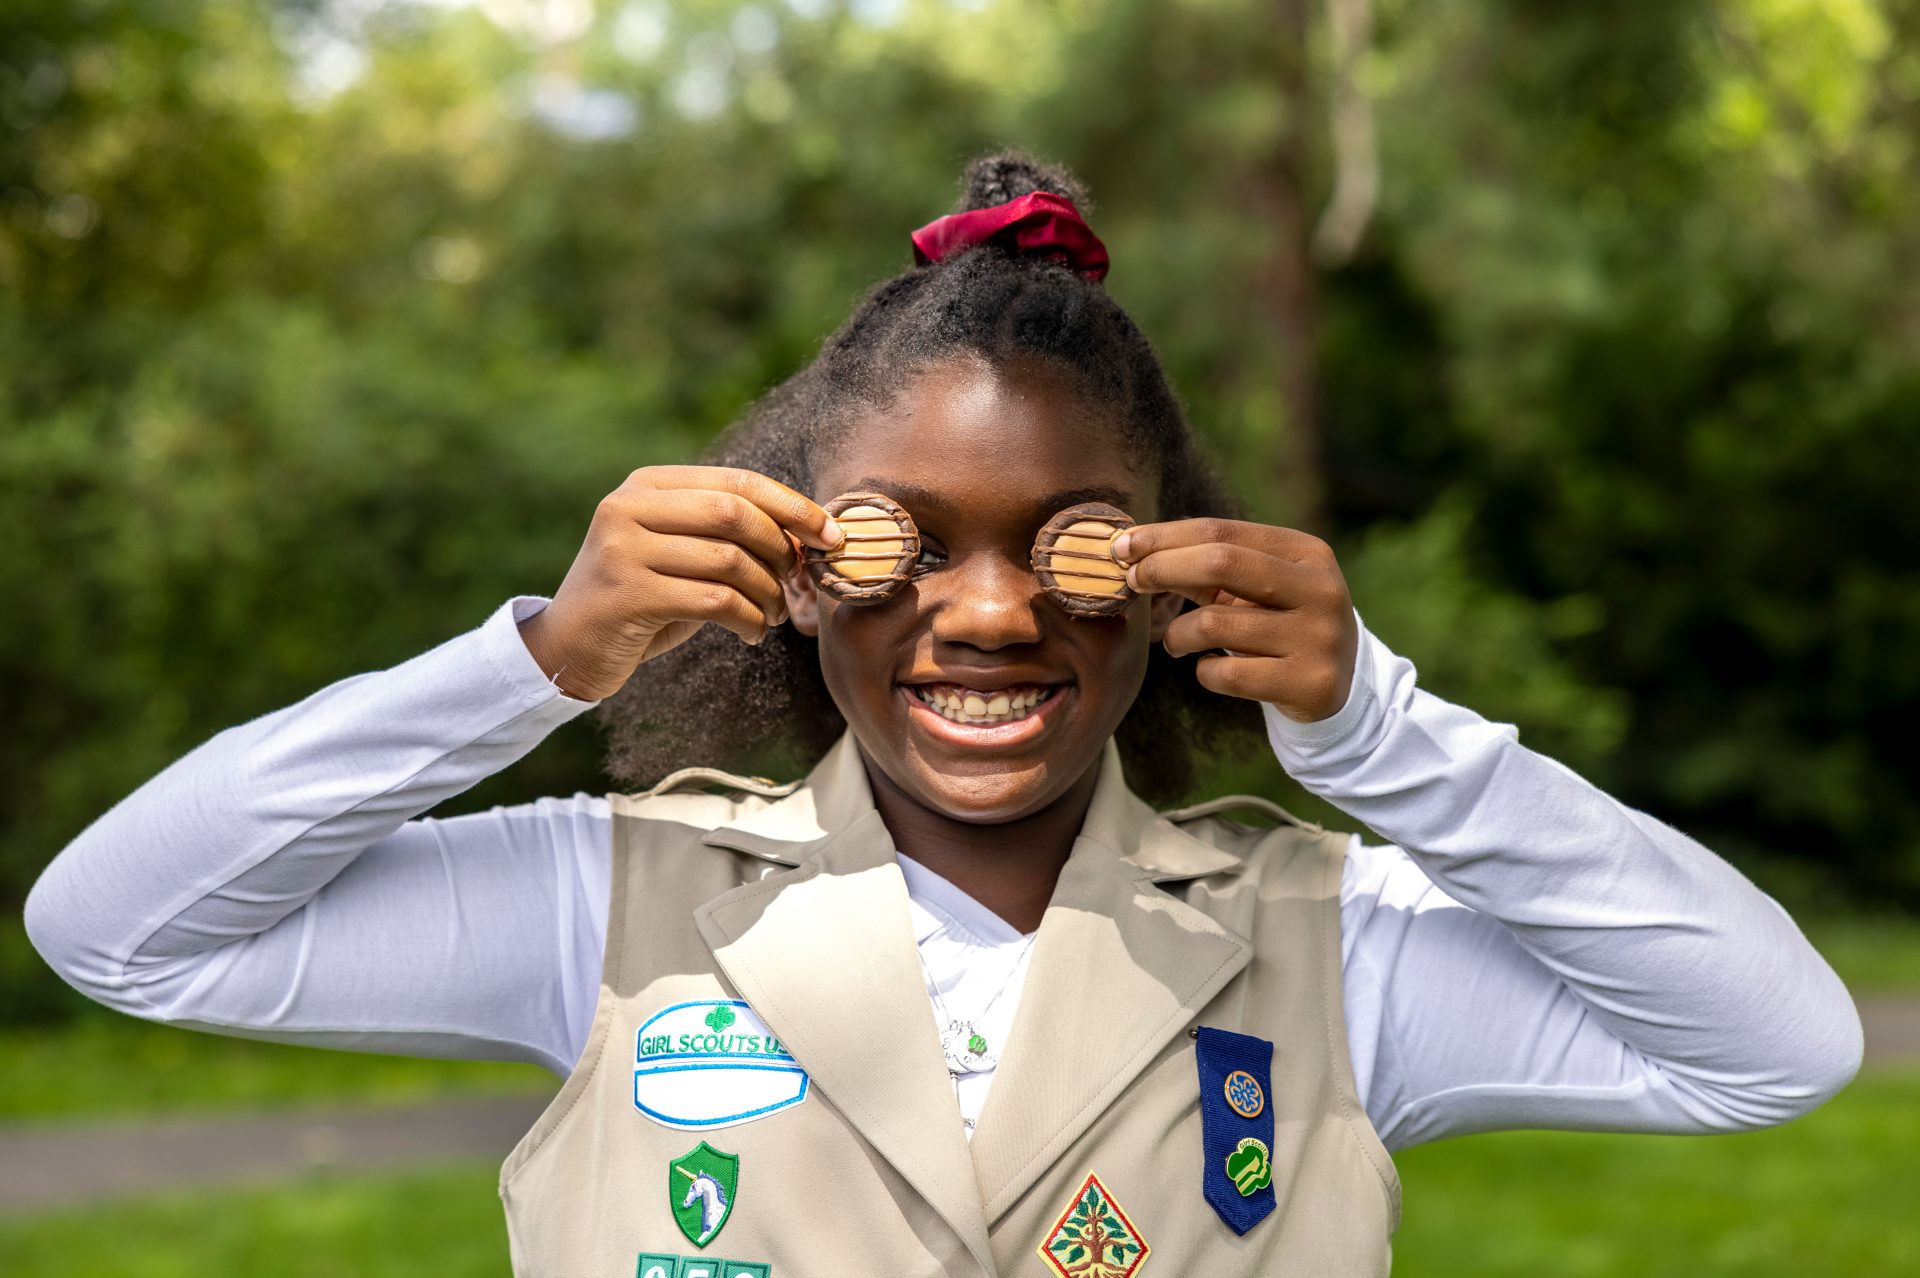 volunteer with junior girl scouts at outside cookie booth smiling